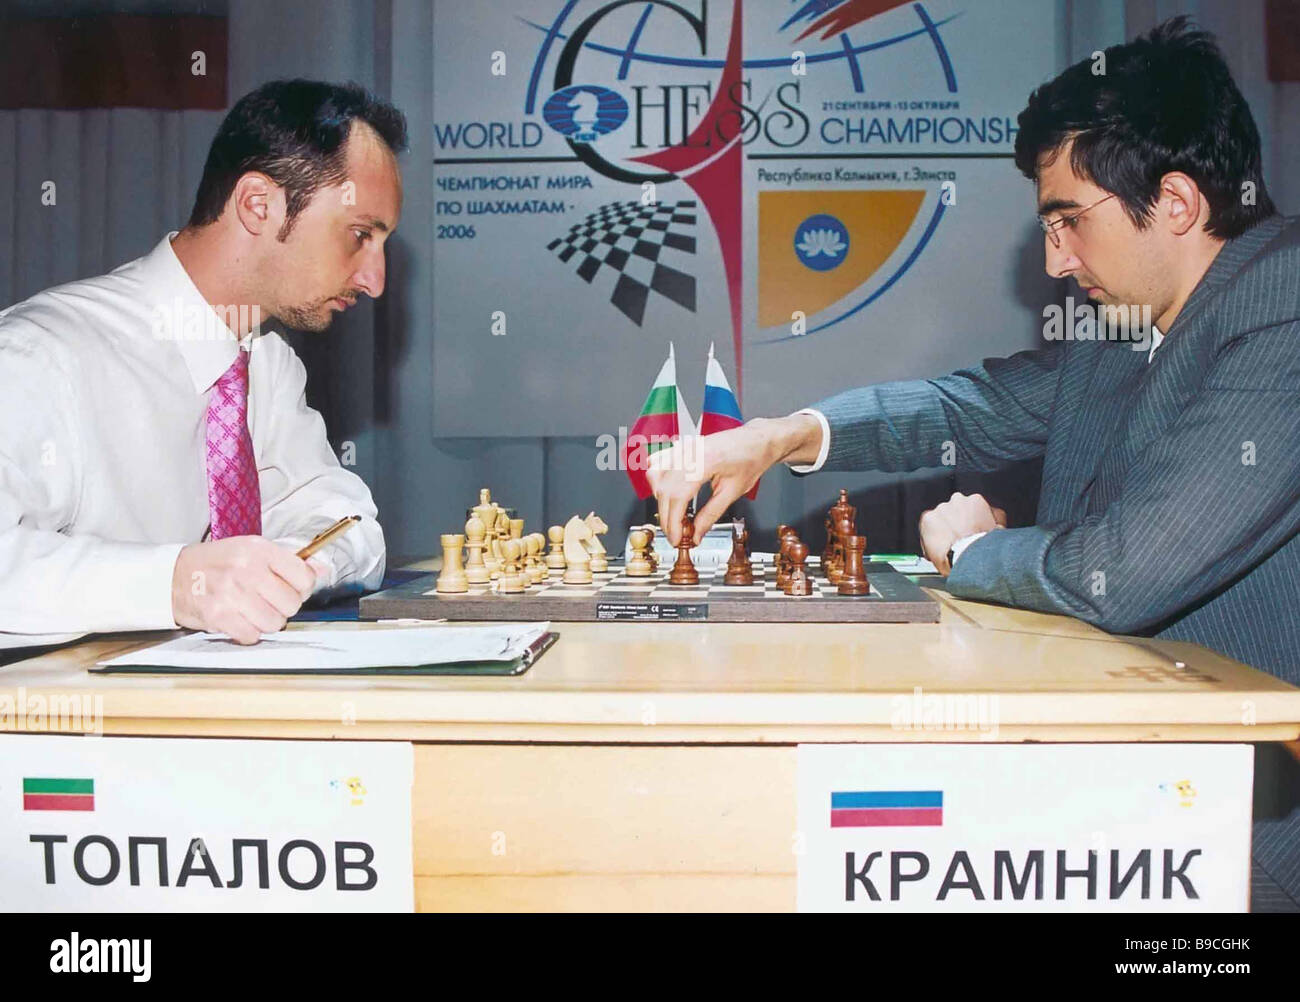 dpa) - Russian World Chess Champion Vladimir Kramnik (L) plays against  Hungarian Grandmaster Peter Leko (R) during the 2004 Dortmund Chess Meeting  in Dortmund, Germany, 23 April 2004. The event takes place